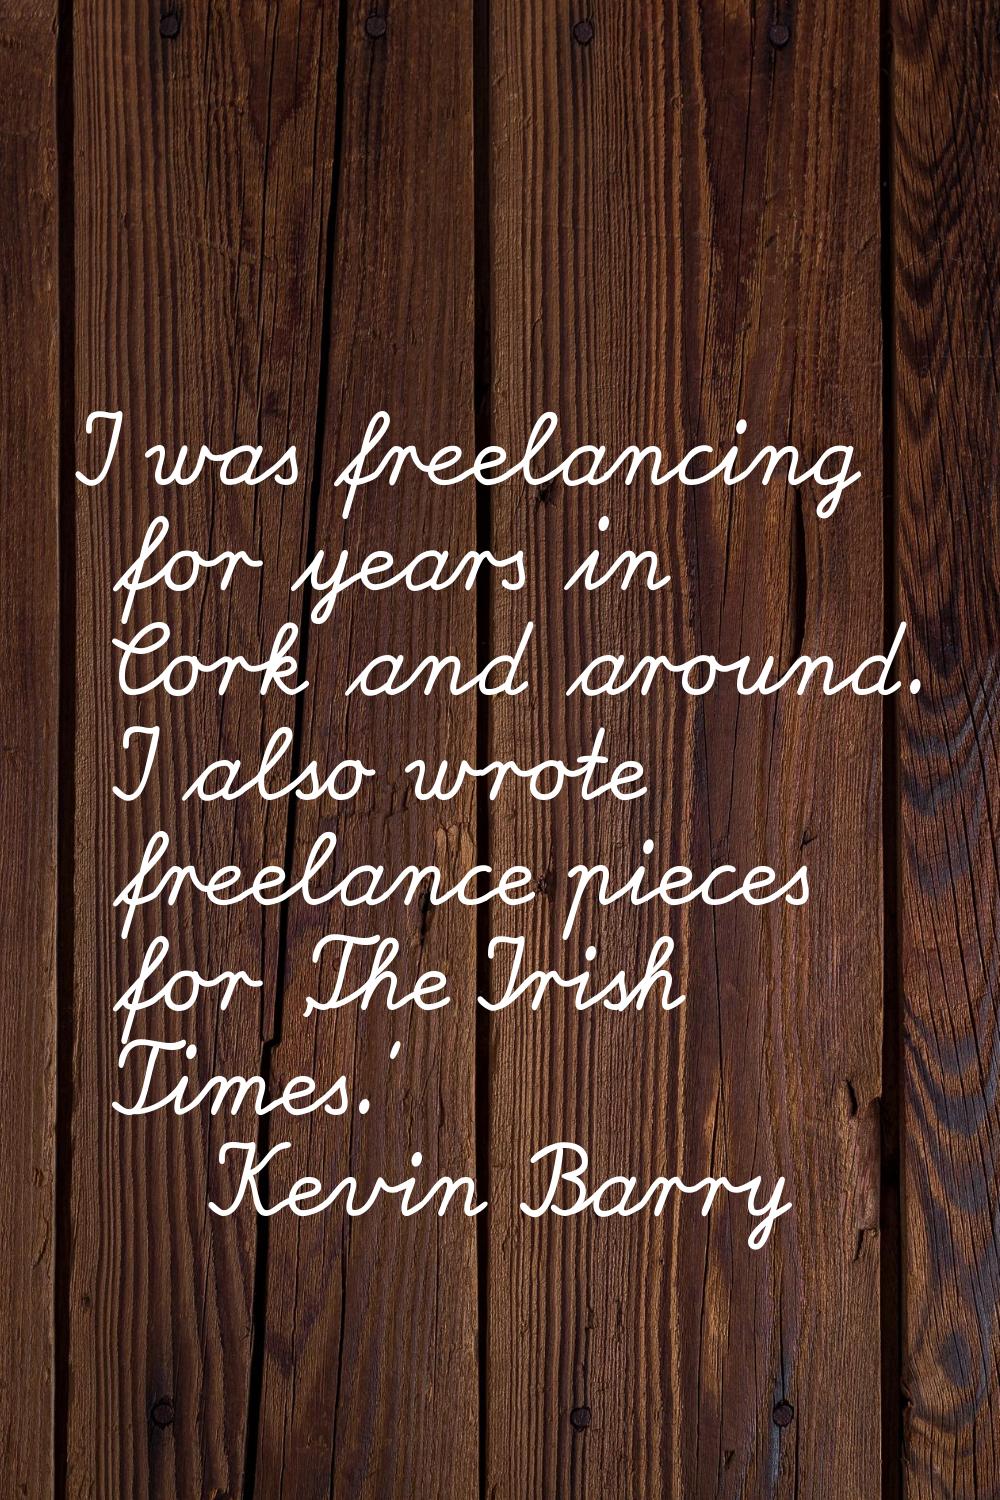 I was freelancing for years in Cork and around. I also wrote freelance pieces for 'The Irish Times.